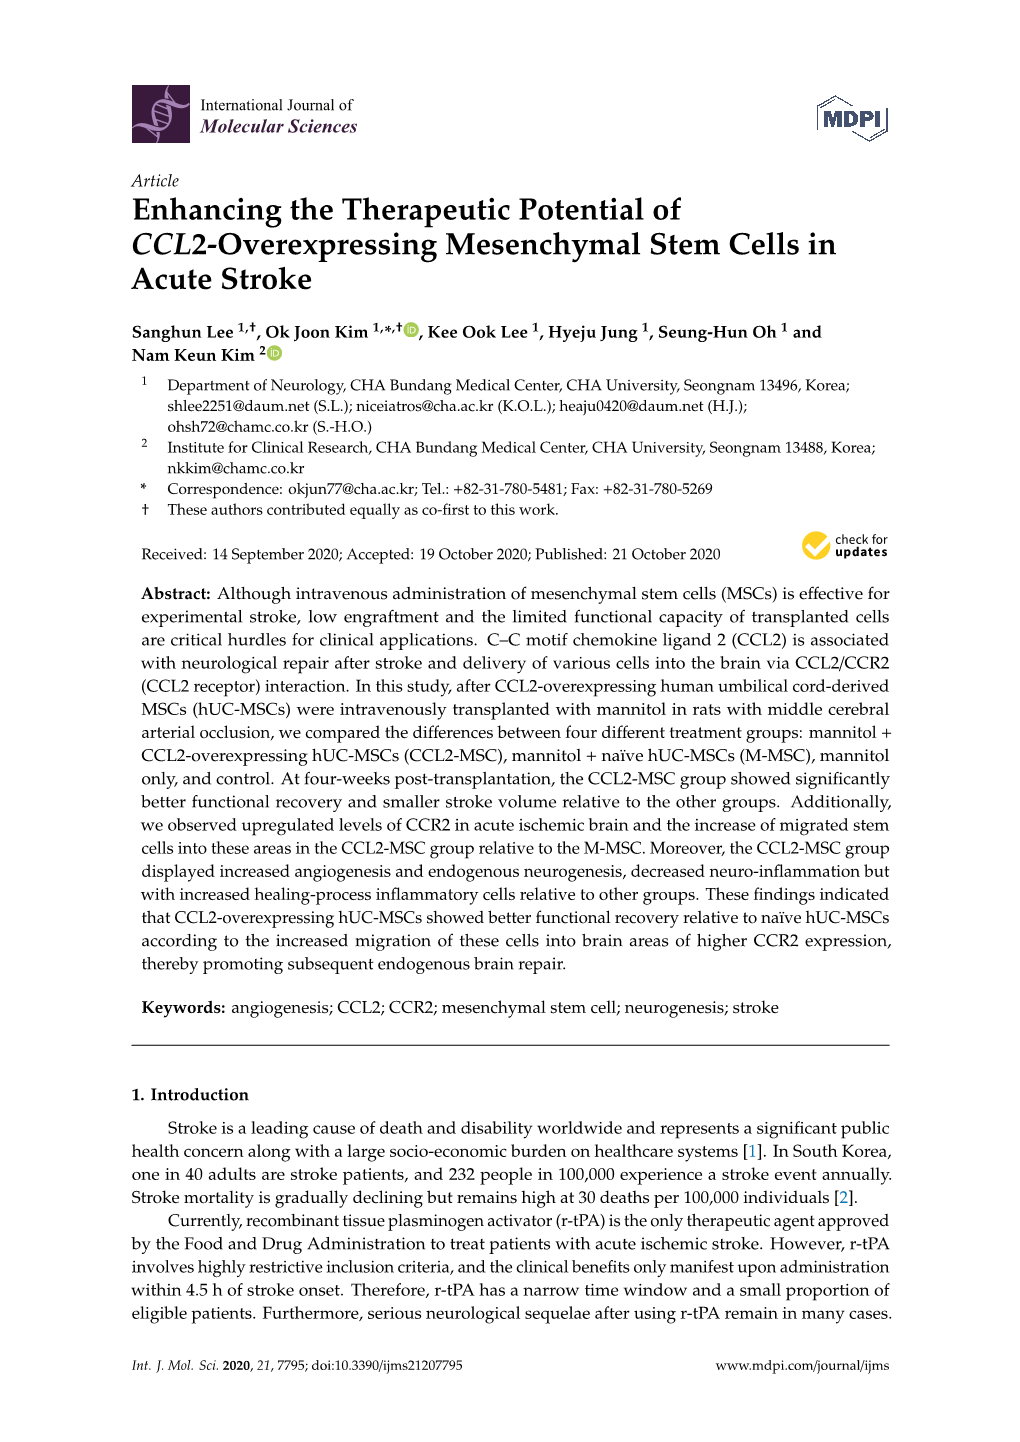 Enhancing the Therapeutic Potential of CCL2-Overexpressing Mesenchymal Stem Cells in Acute Stroke